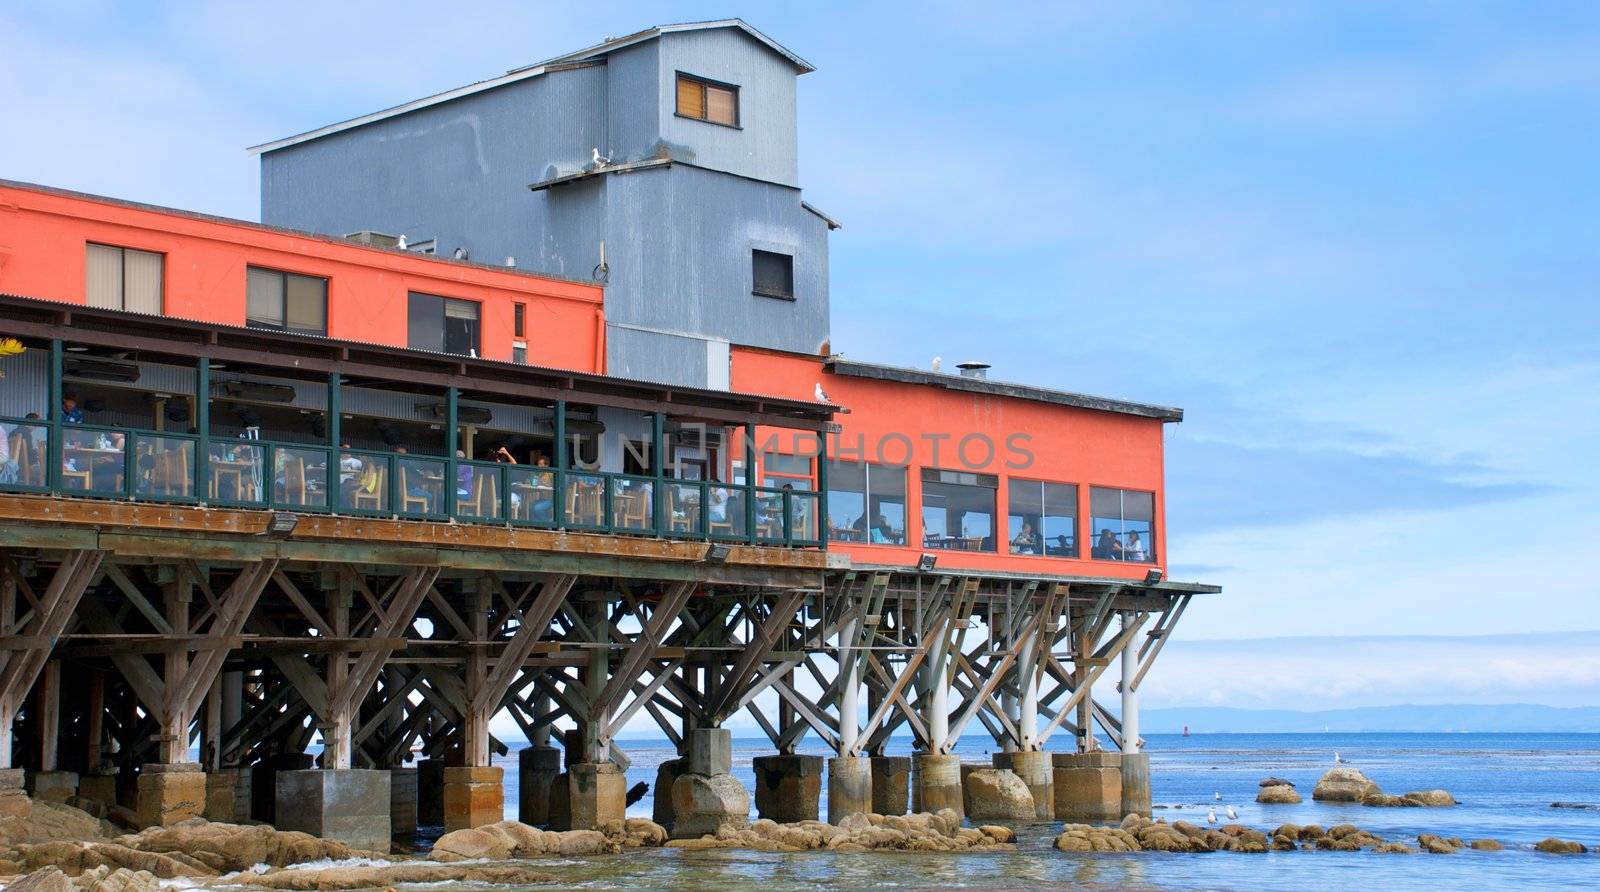 A restaurant sitting on a large wooden pier along the coast in Monterey California